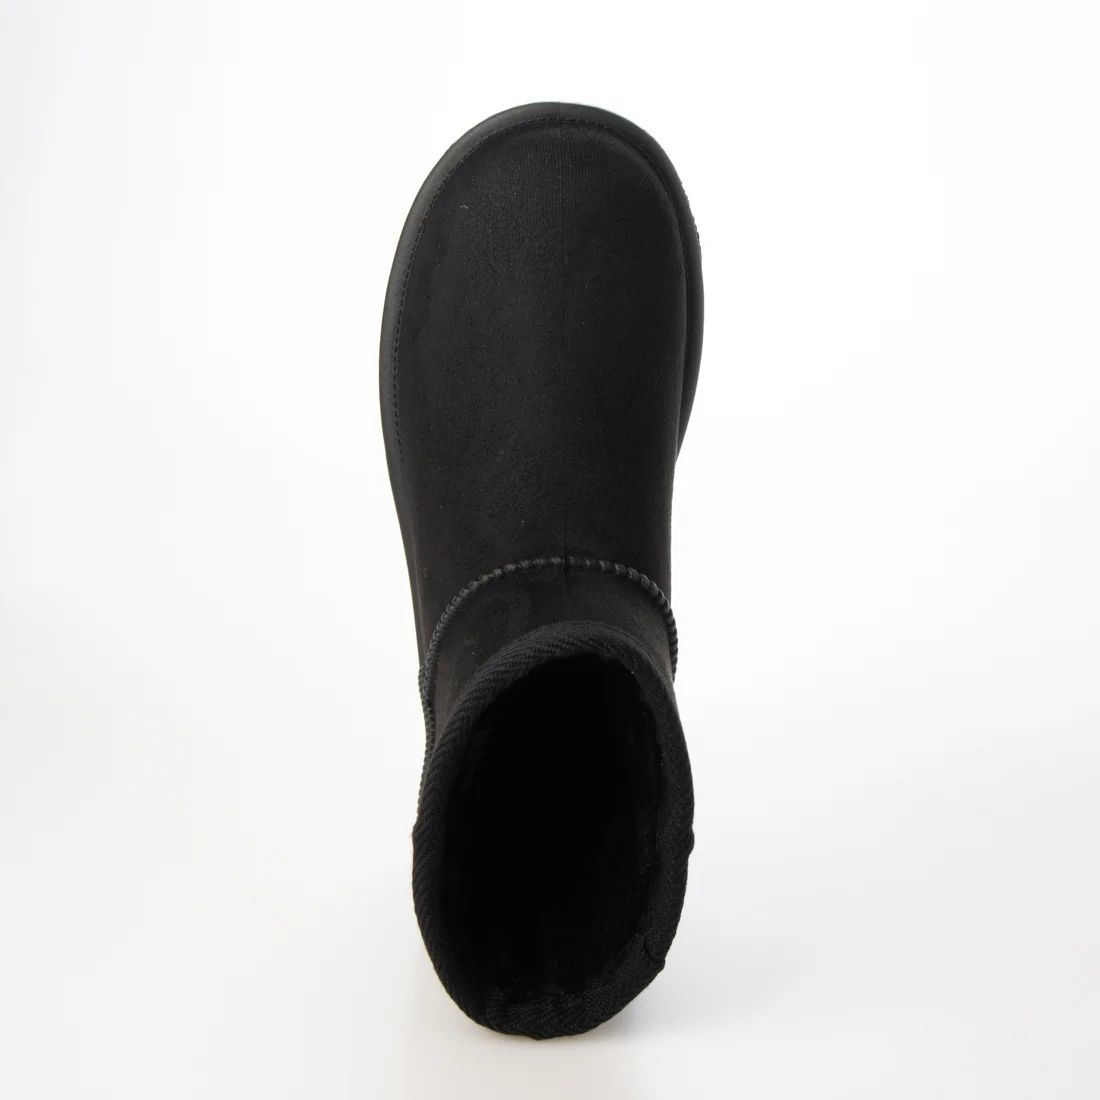  protection against cold boots mouton boots short boots new goods [22076-BLK-235]23.5cm suede style Family size.